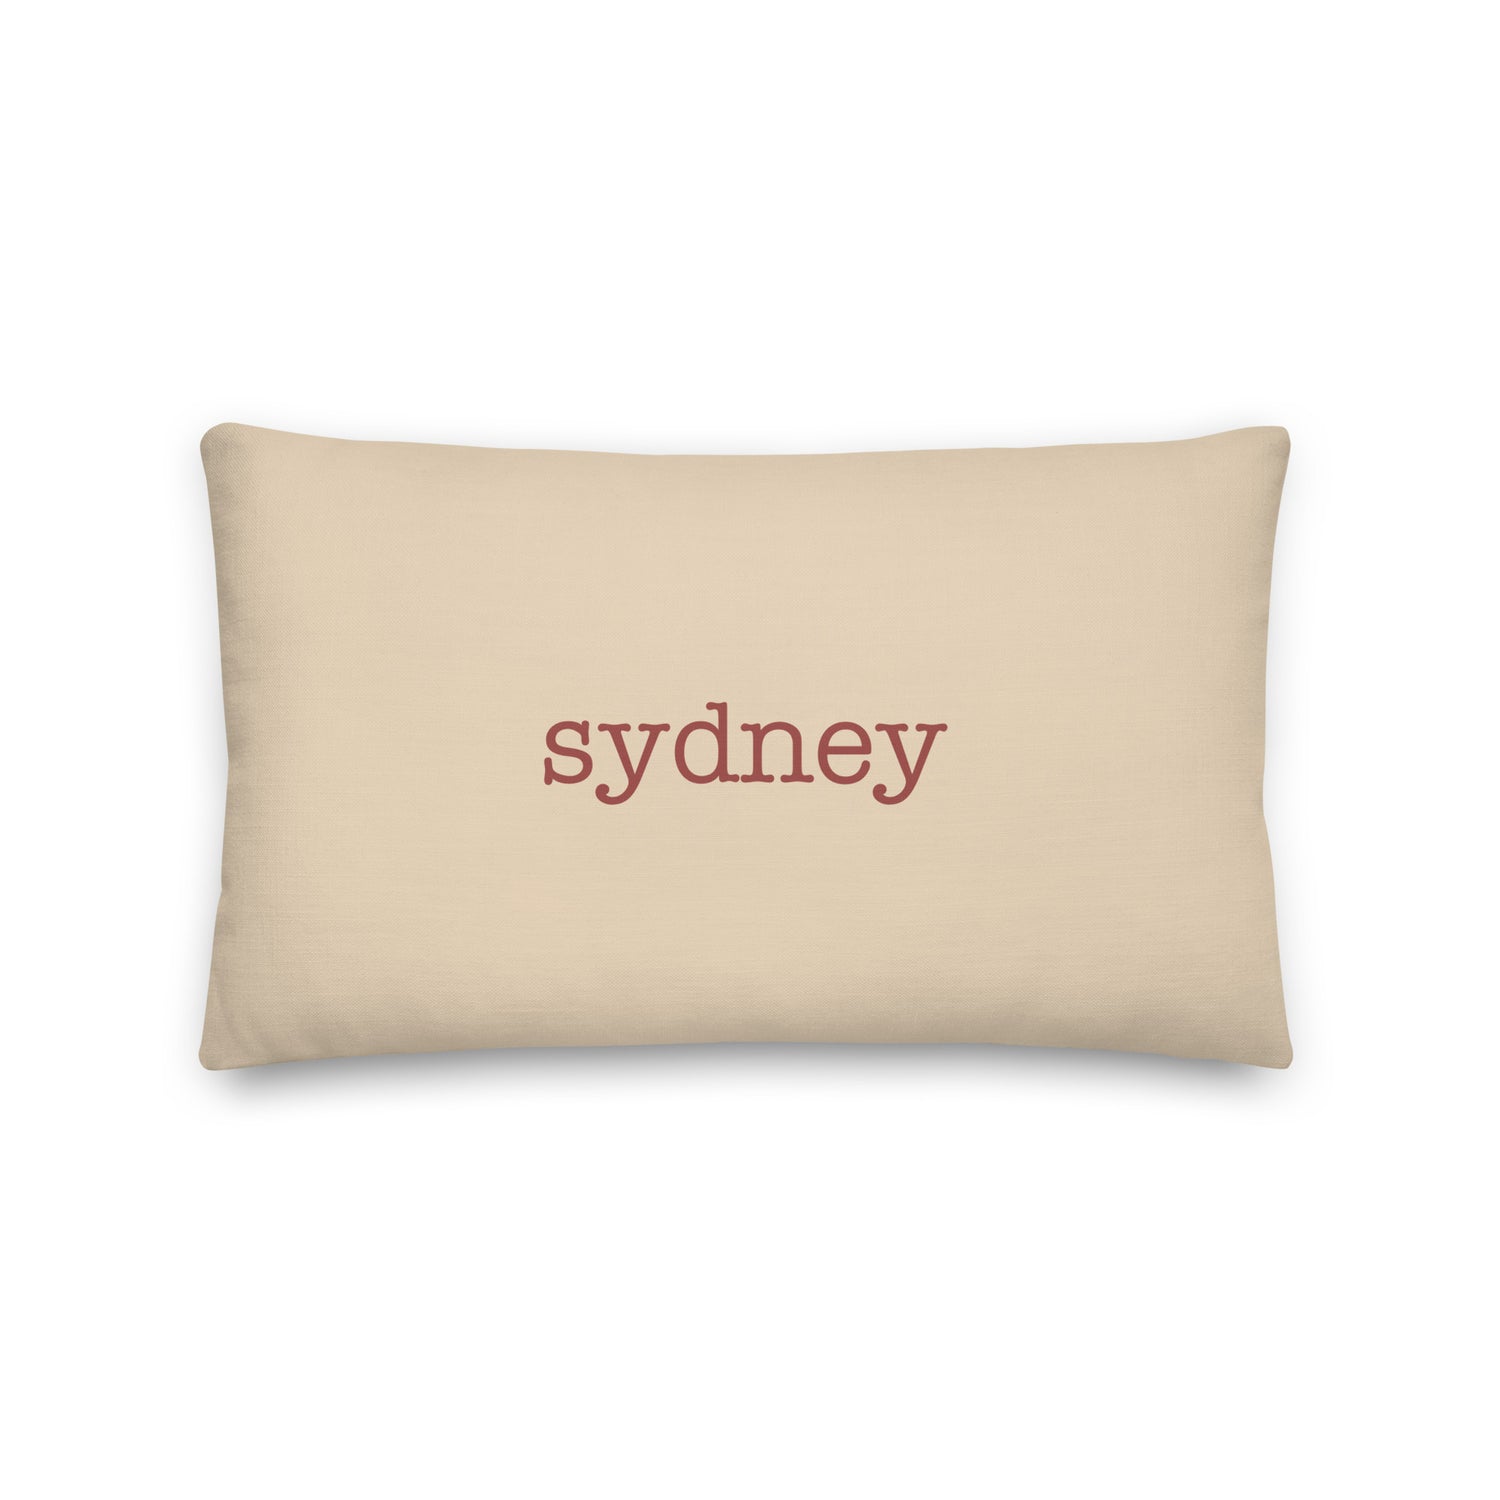 Sydney Australia Pillows and Blankets • SYD Airport Code